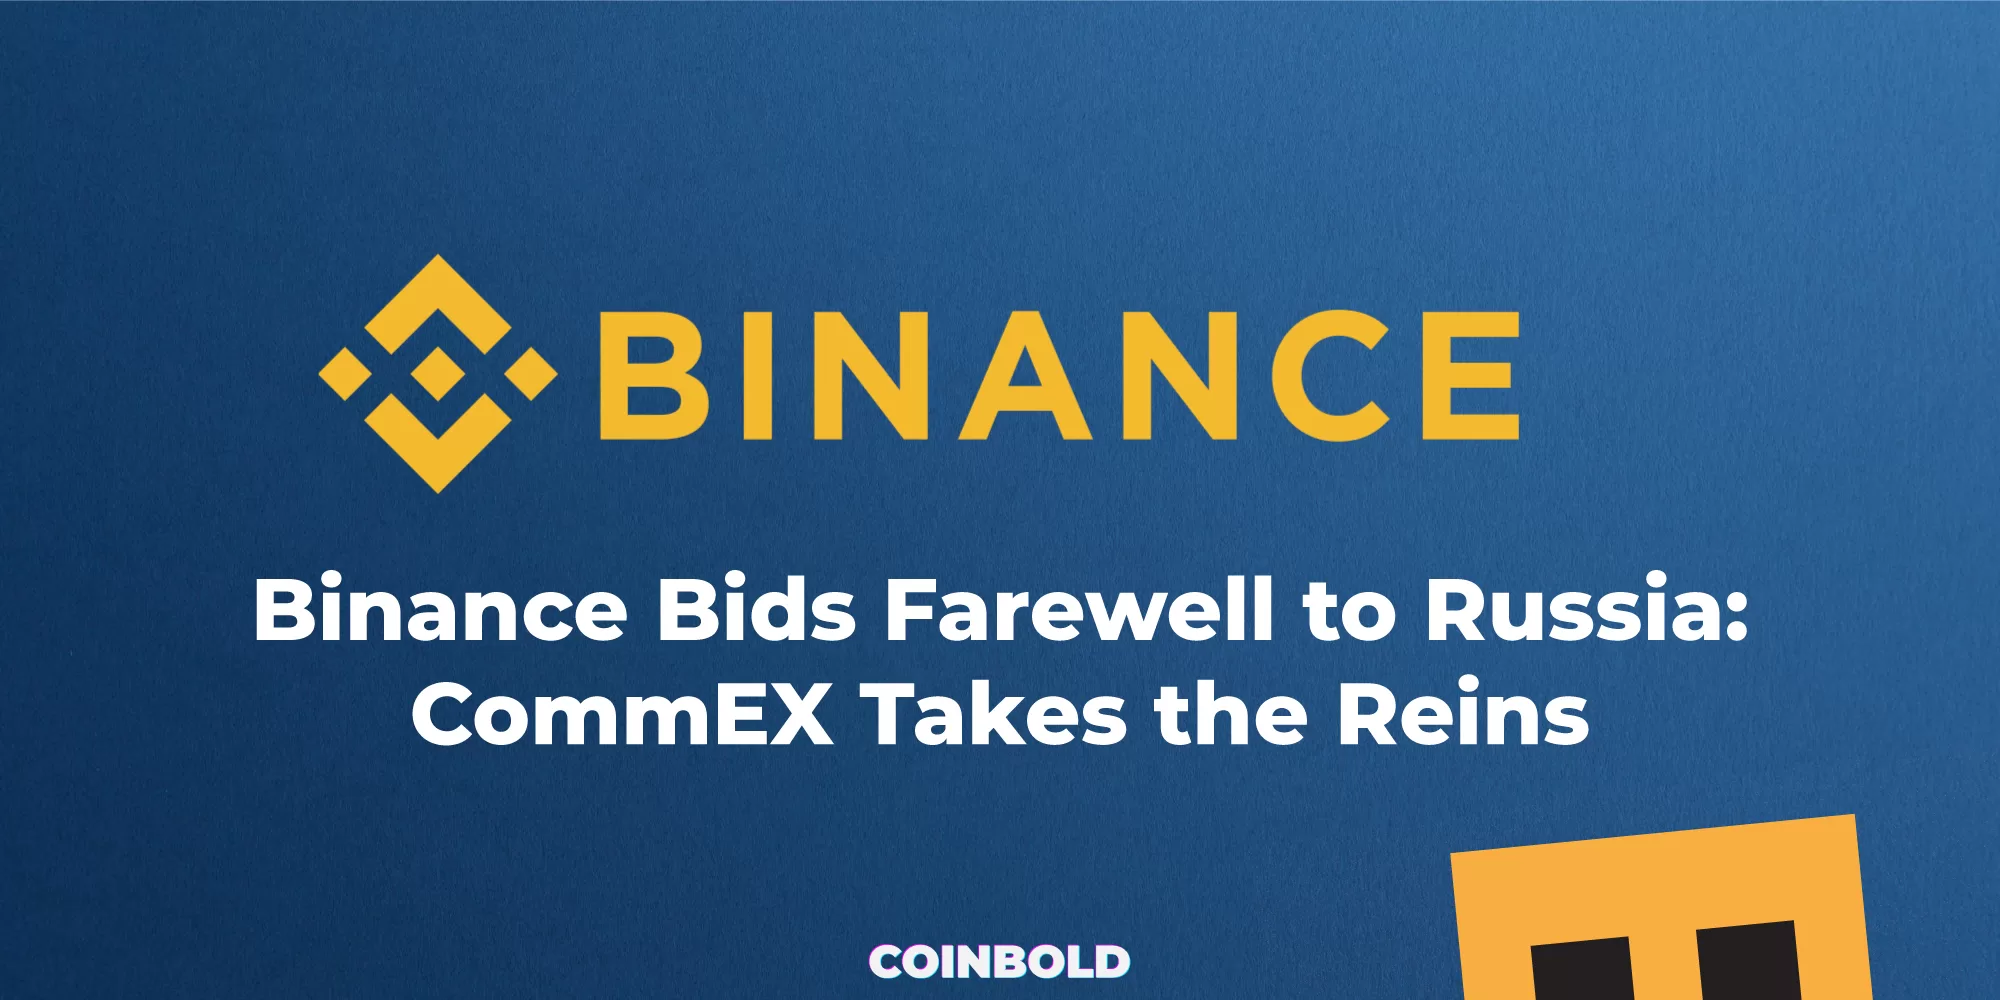 Binance Bids Farewell to Russia CommEX Takes the Reins